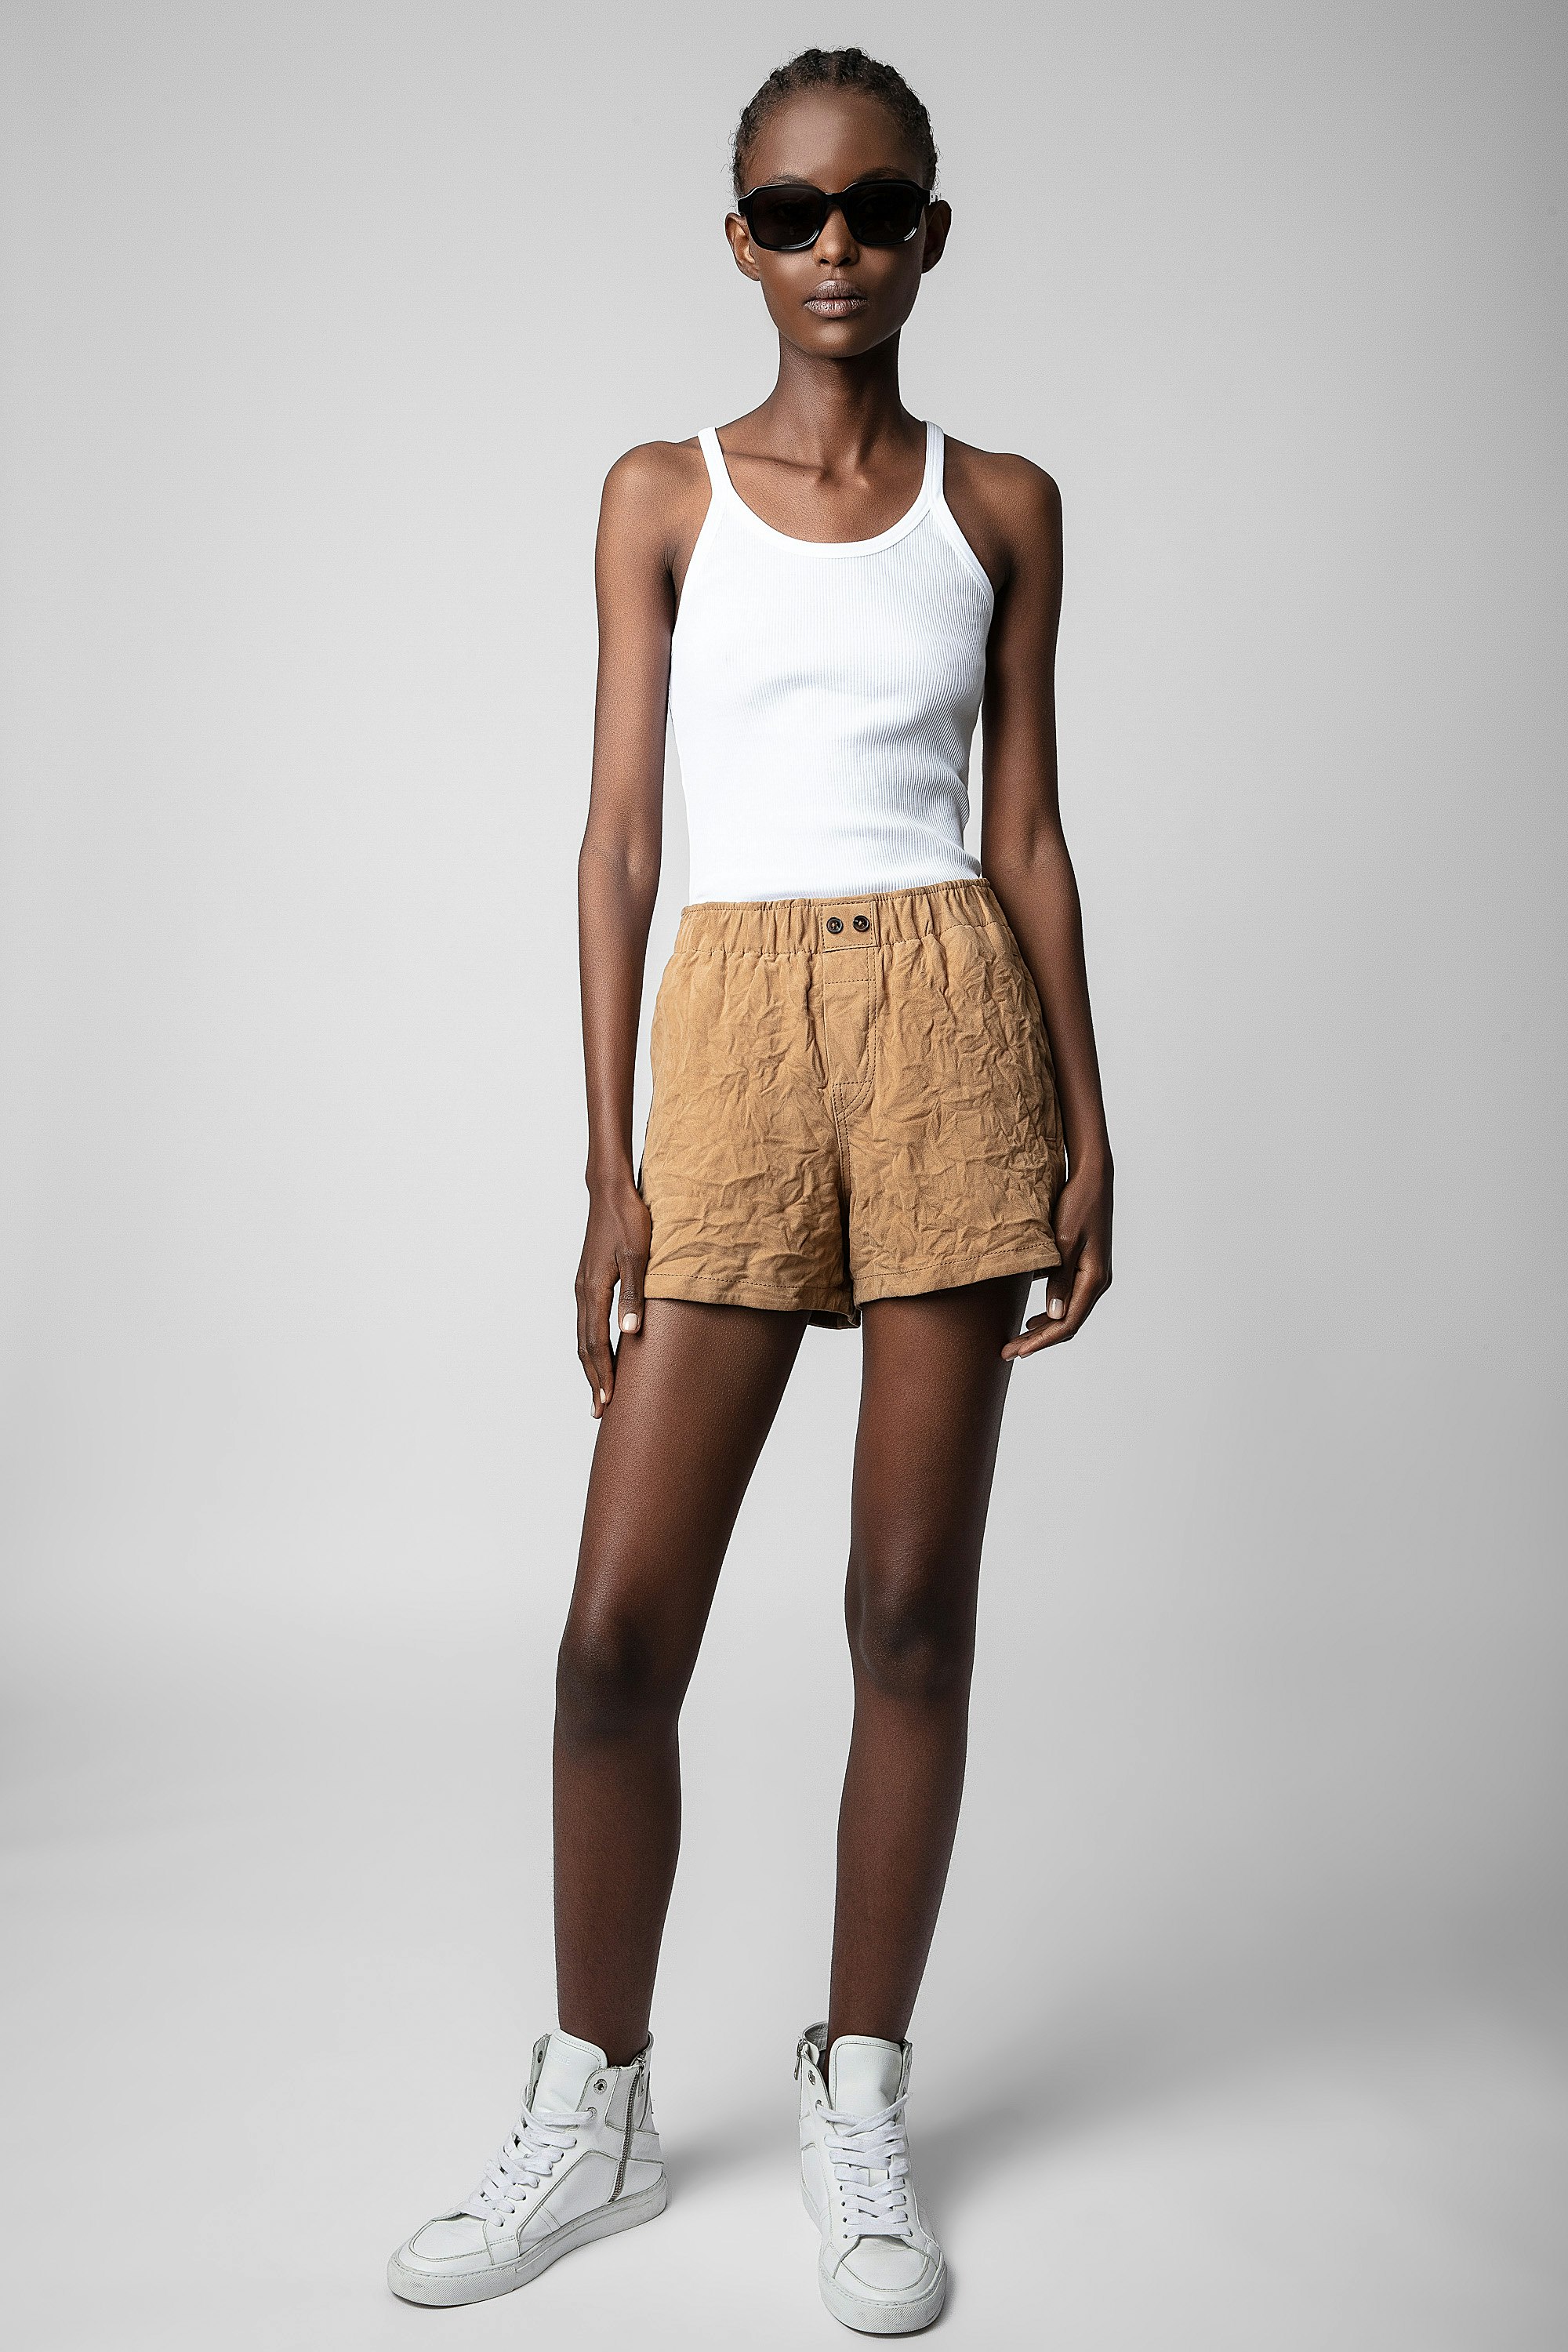 Paxi Creased Suede Shorts - Women's crinkled cognac suede shorts